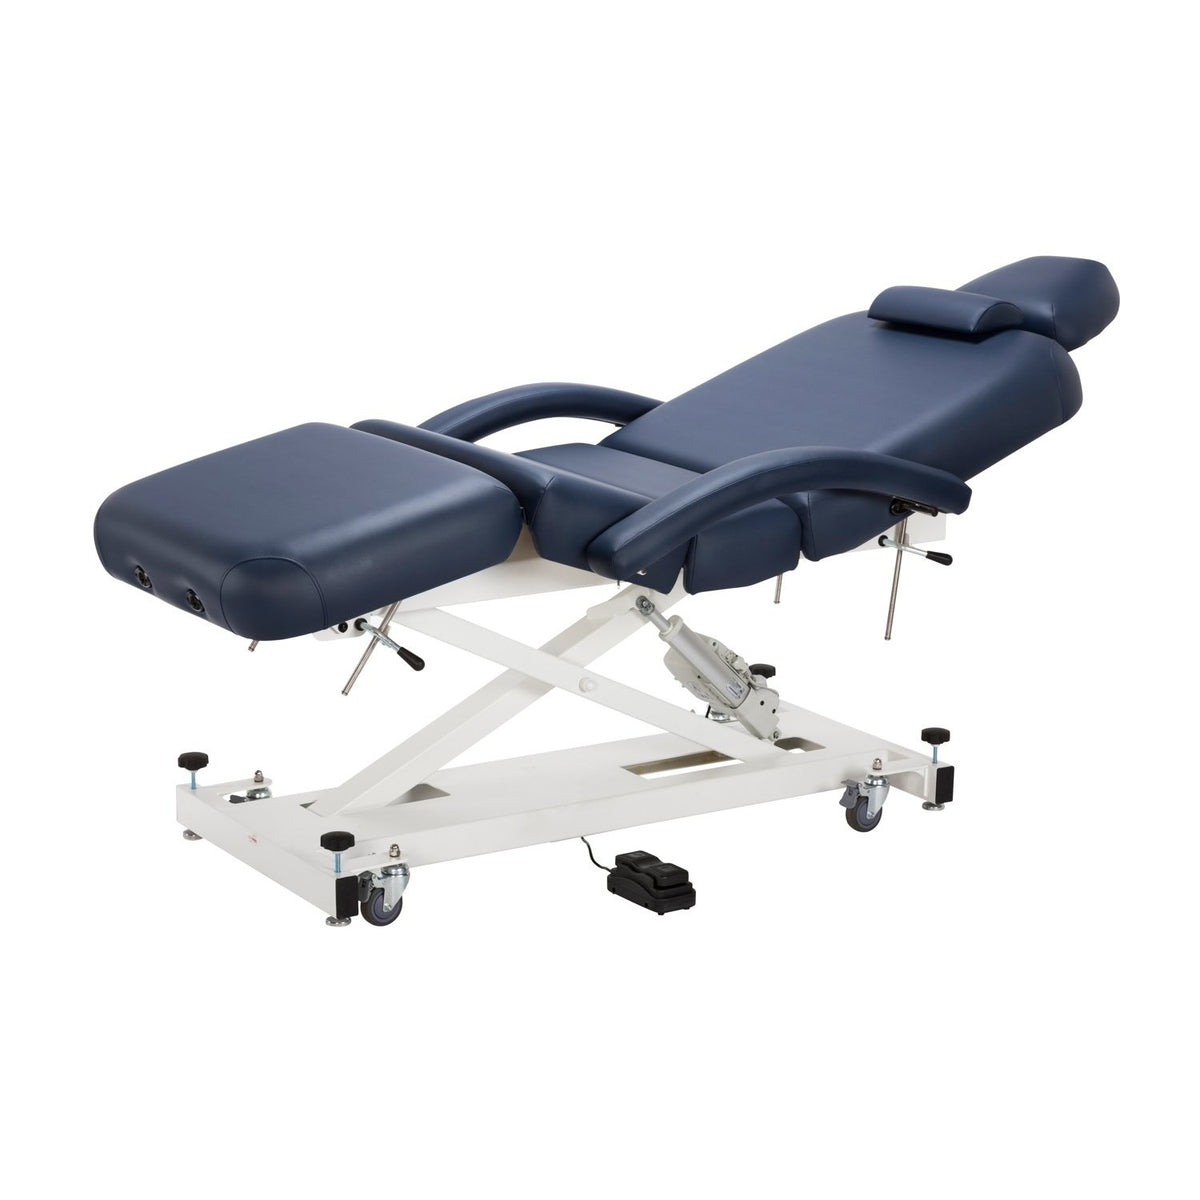 Equipro Equipro Divine Therapeutic Massage Facial Bed Massage &amp; Treatment Table - ChairsThatGive